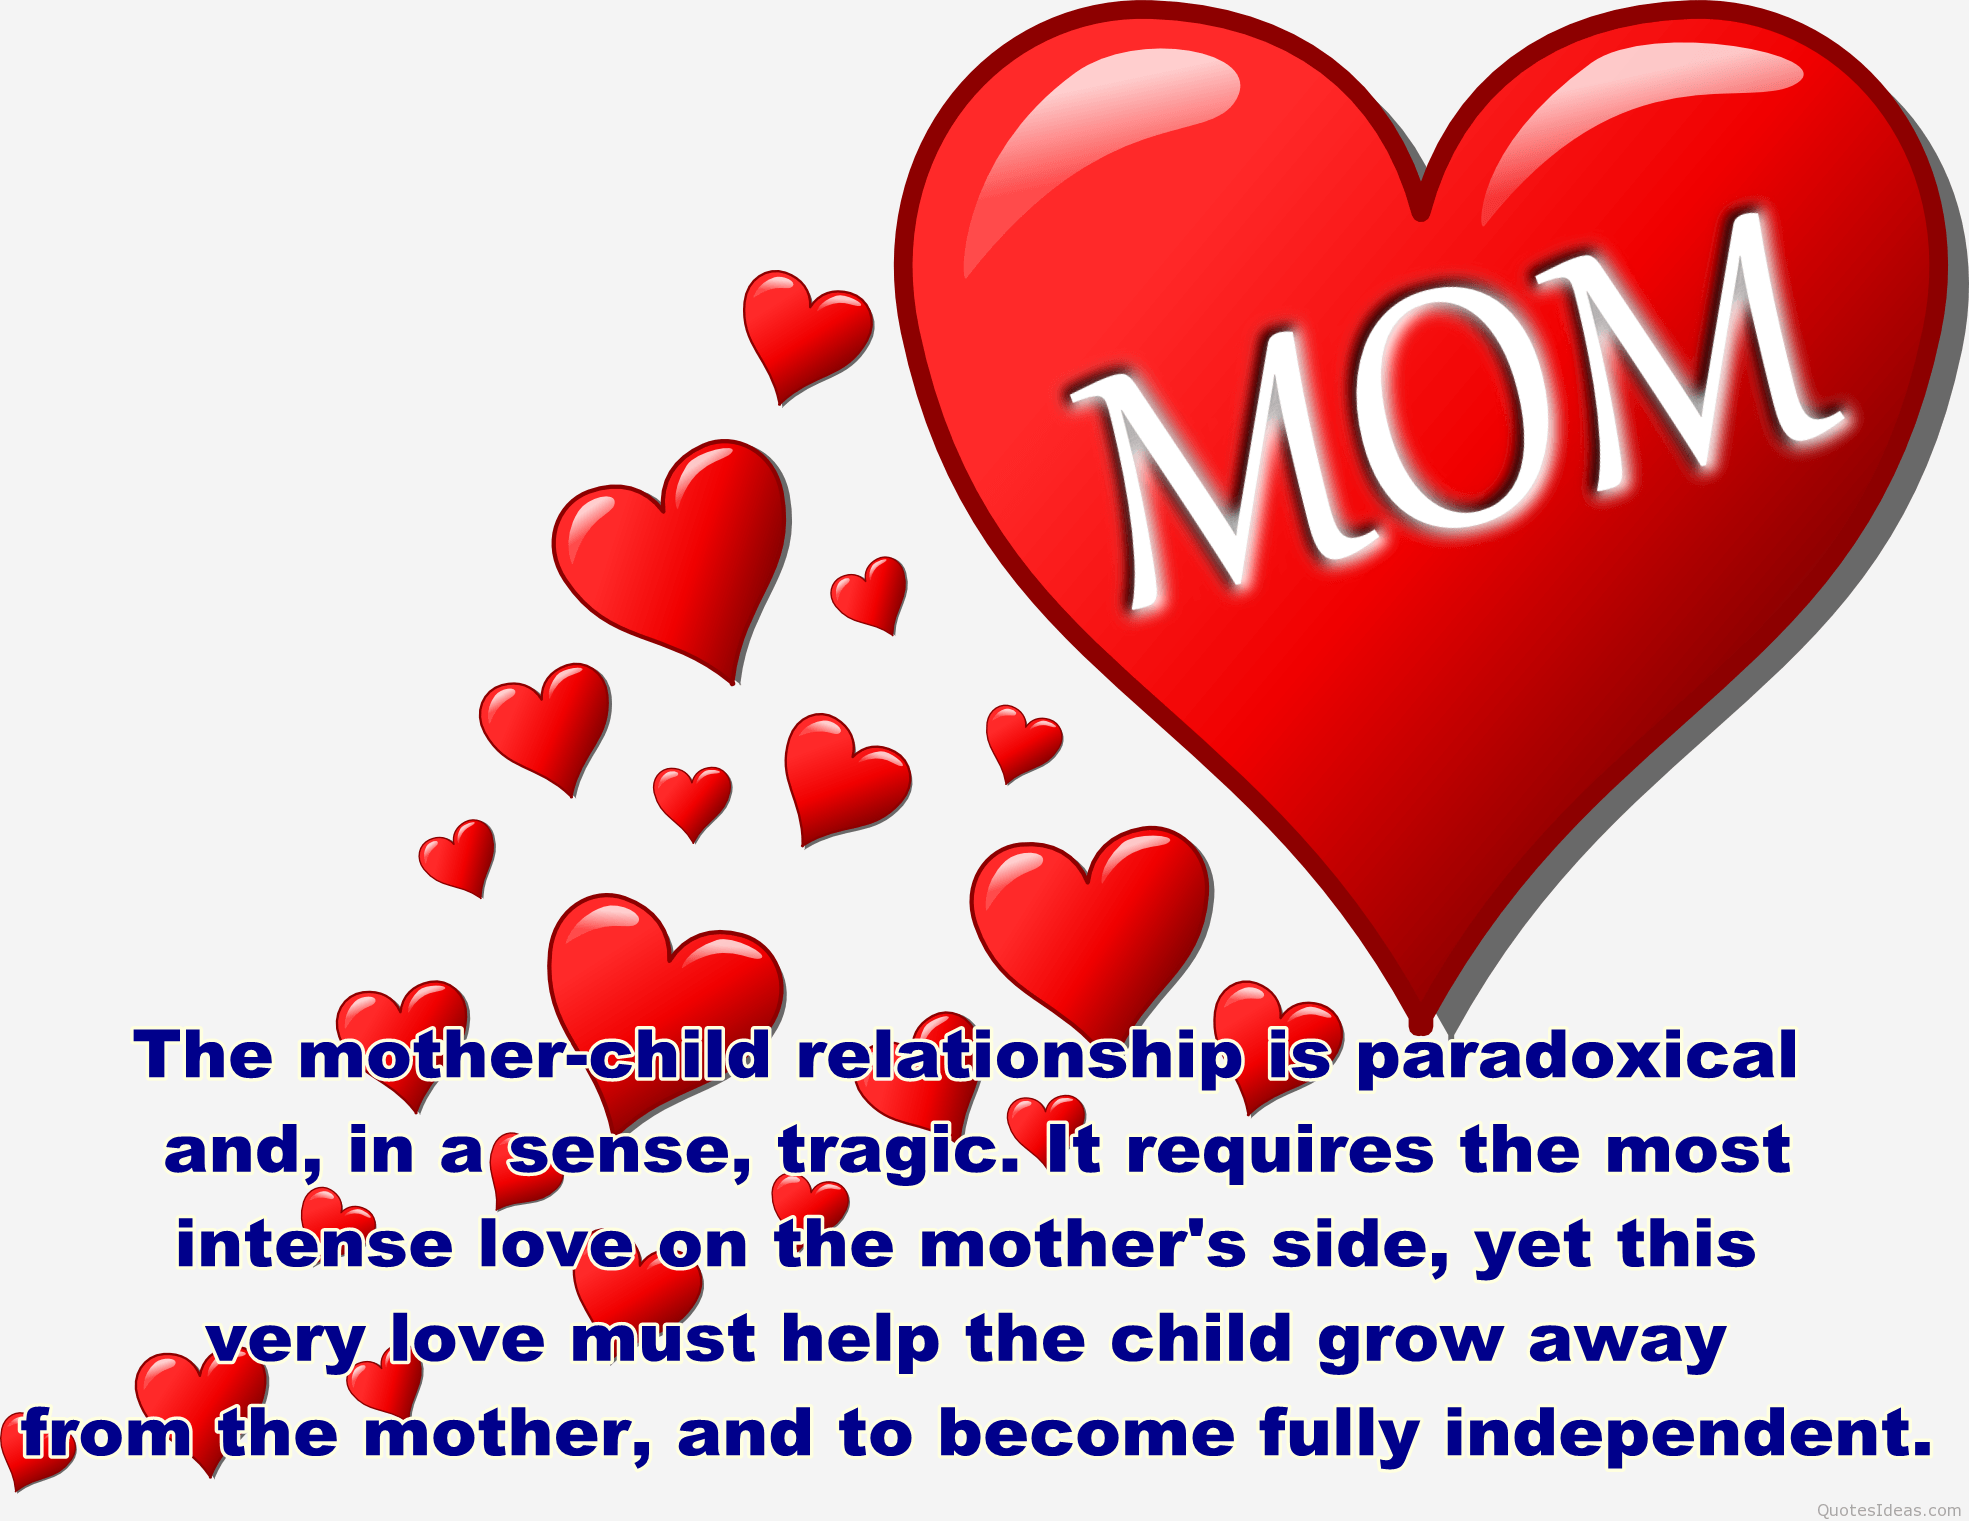 Love mom wallpaper with quote